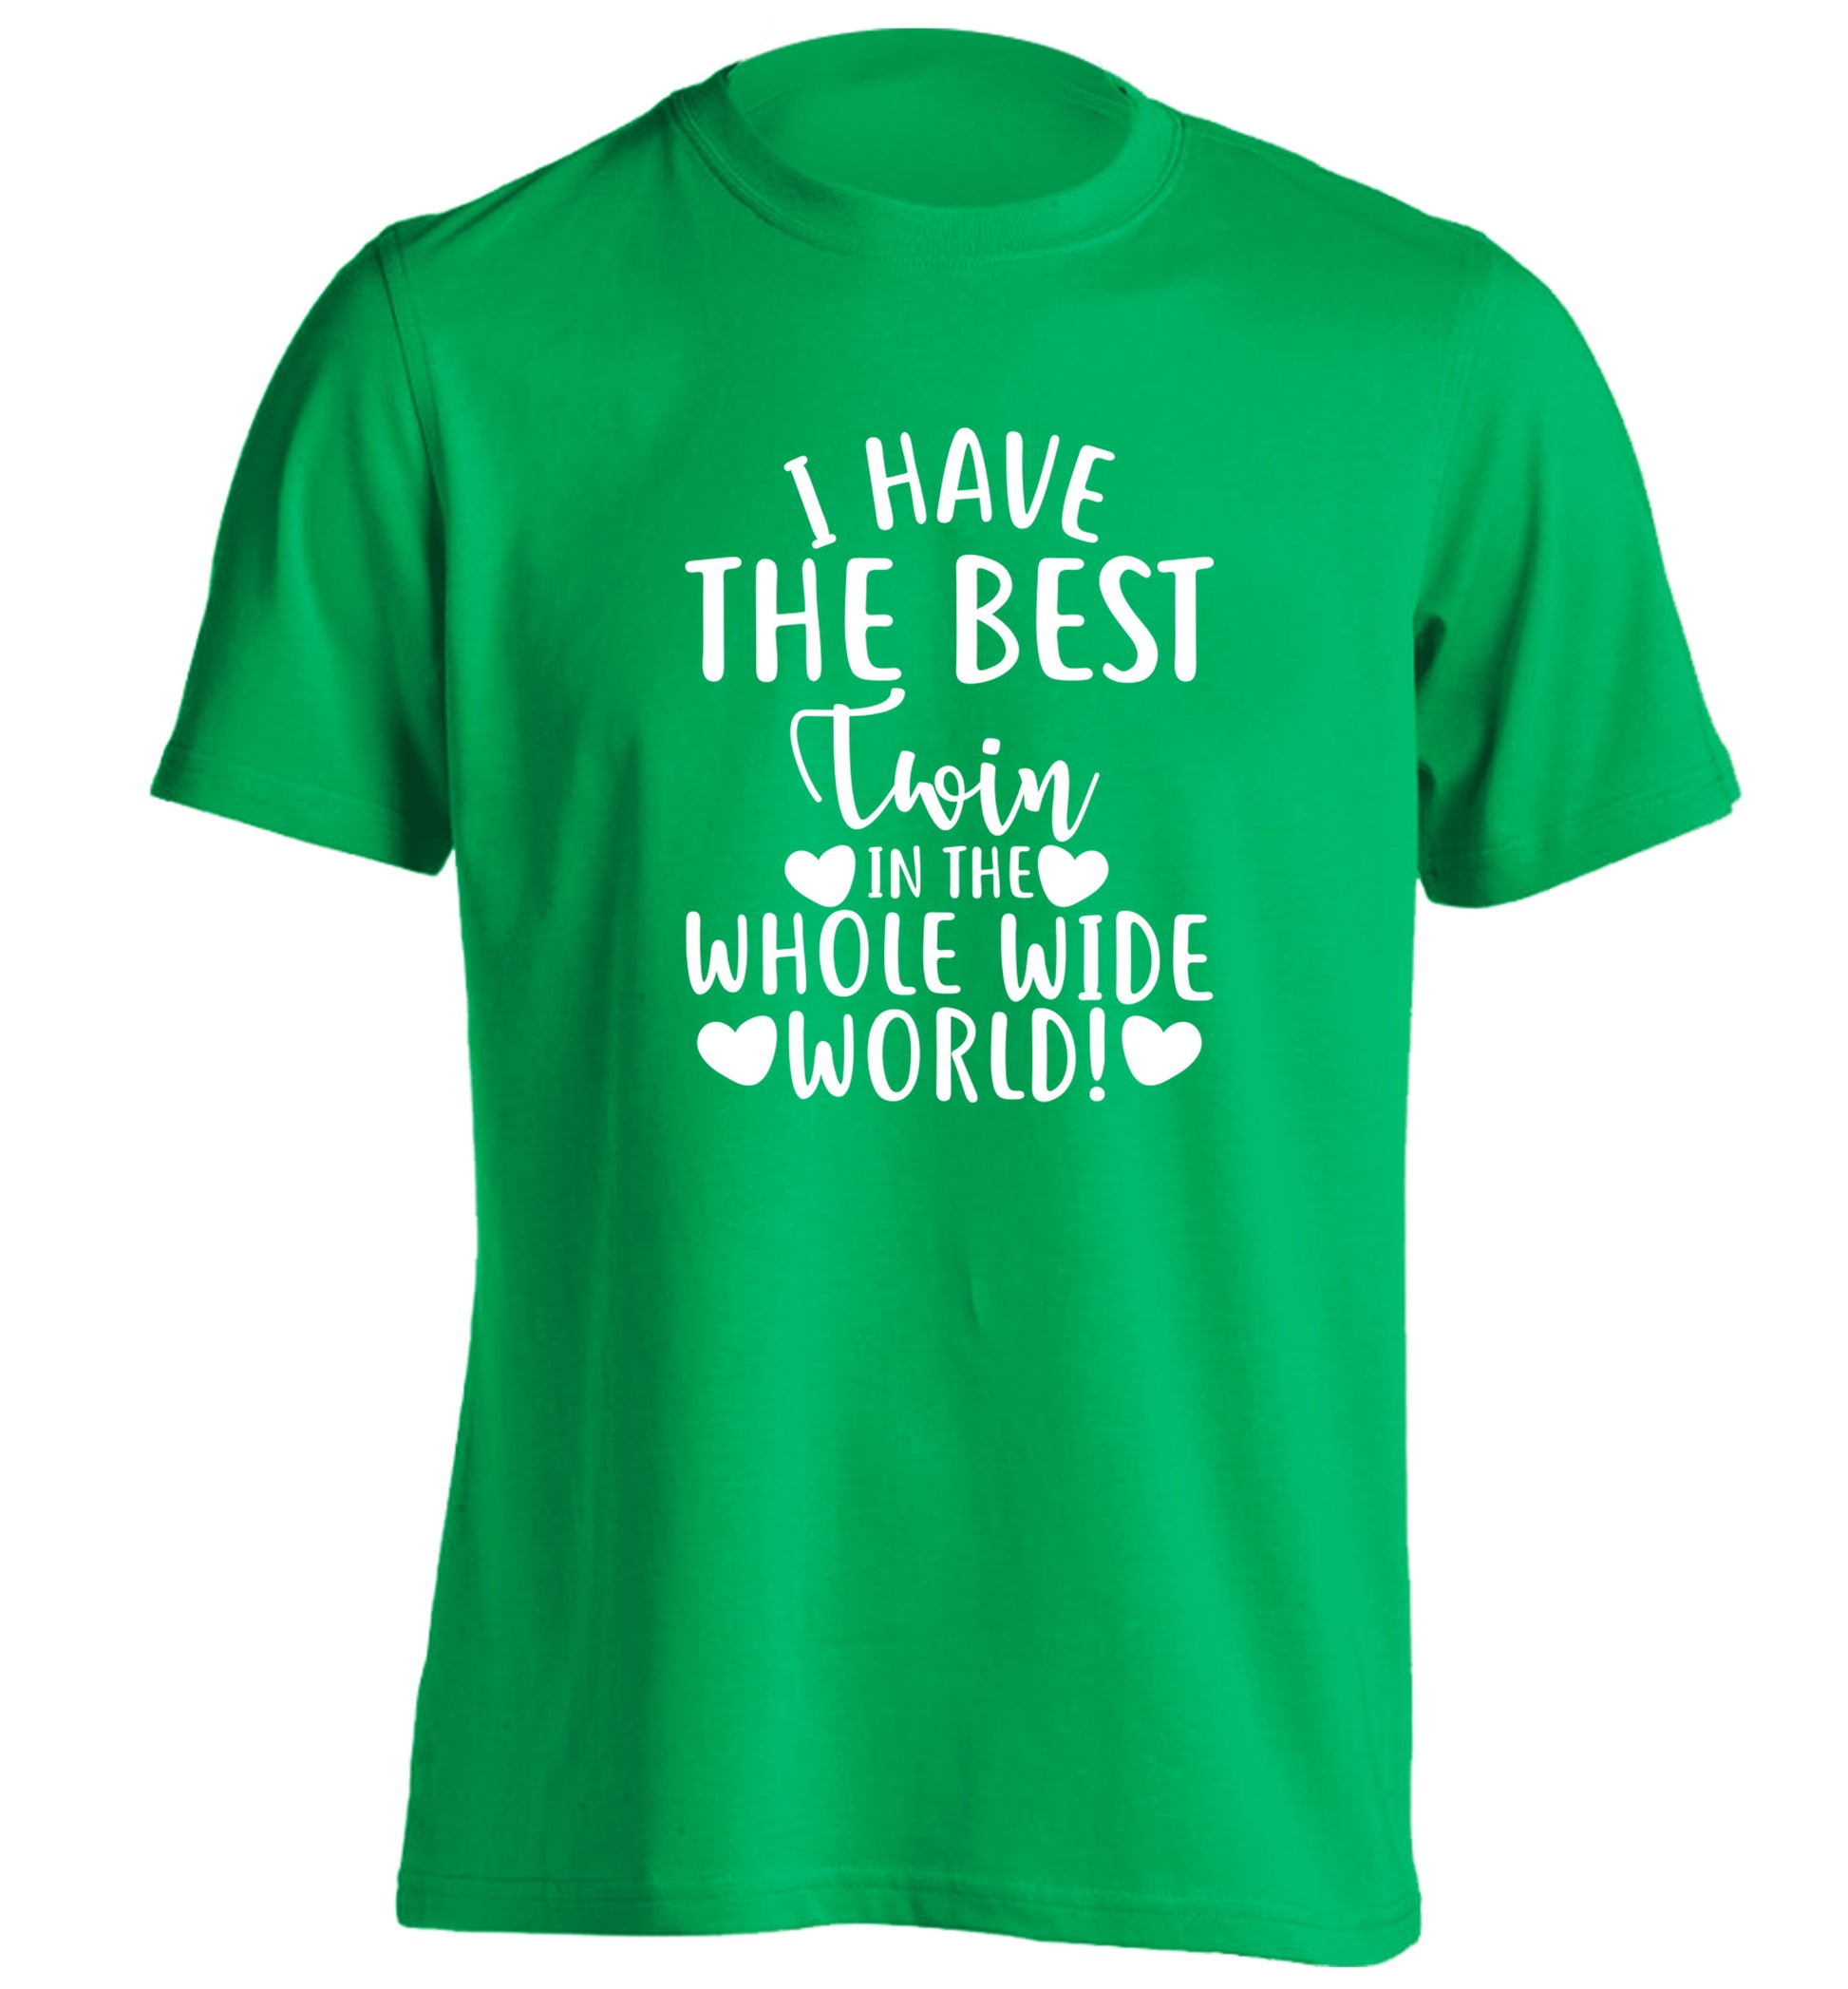 I have the best twin in the whole wide world! adults unisex green Tshirt 2XL